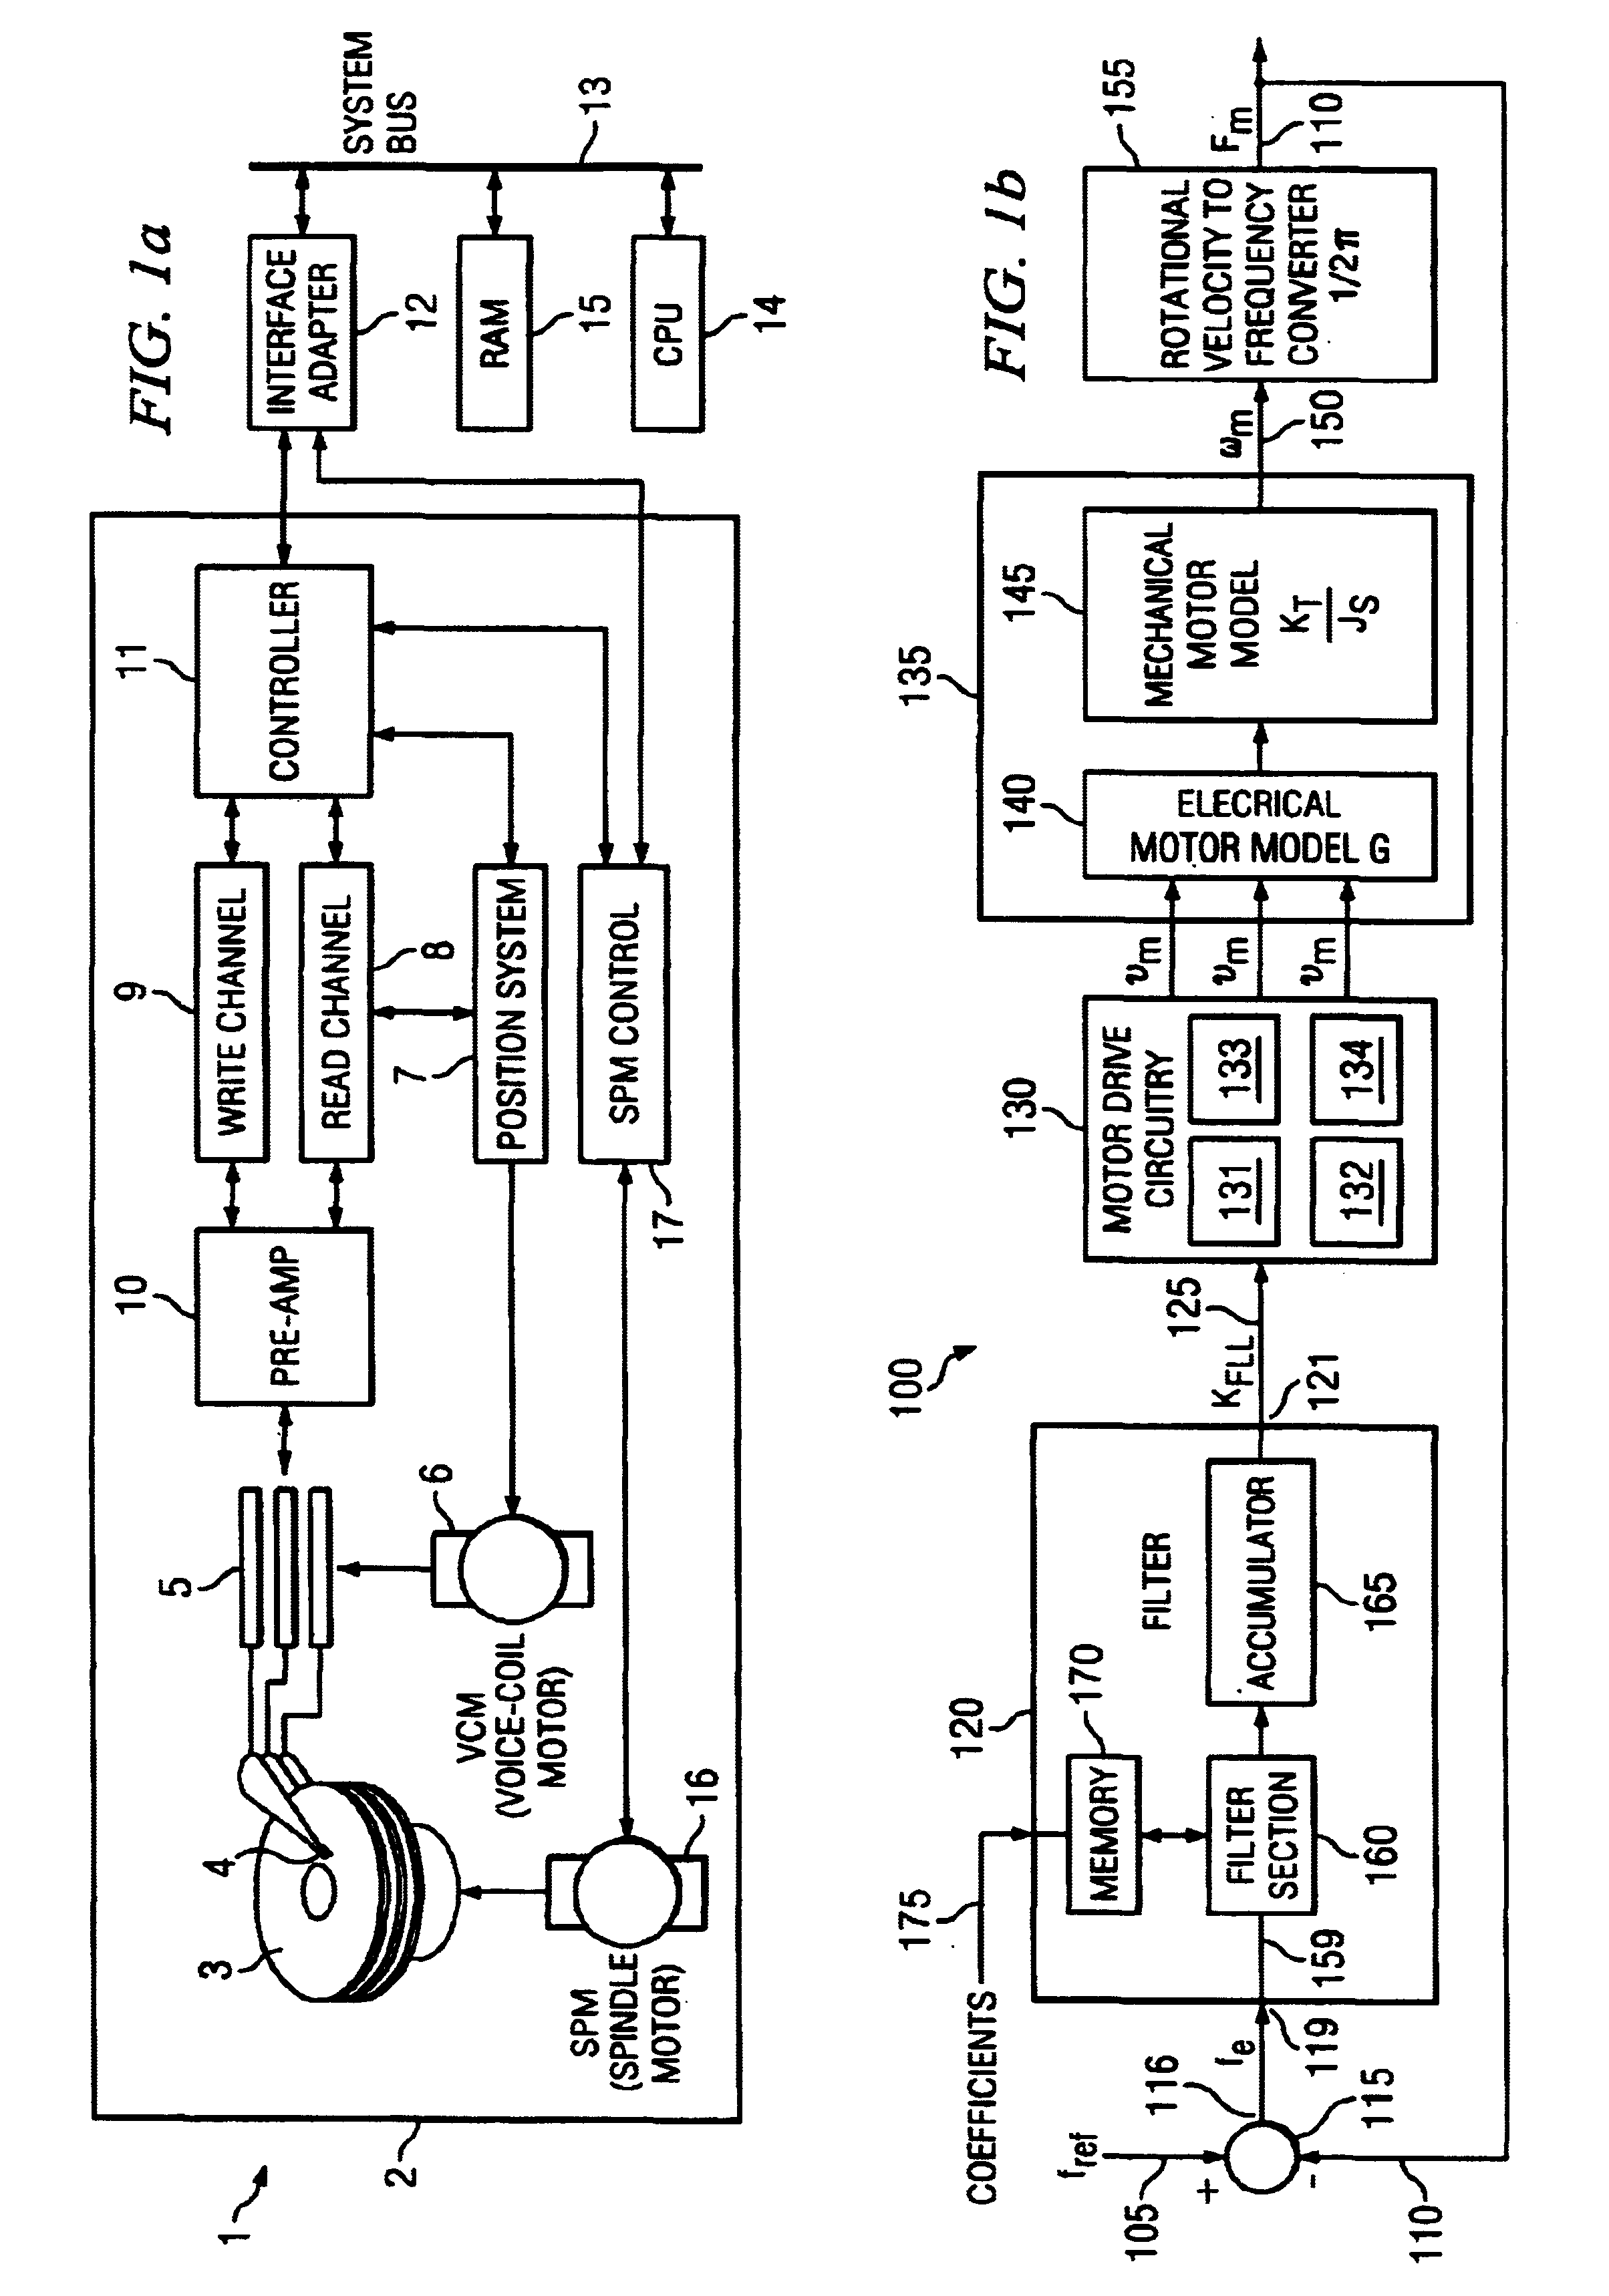 Embedded programmable filter for disk drive velocity control